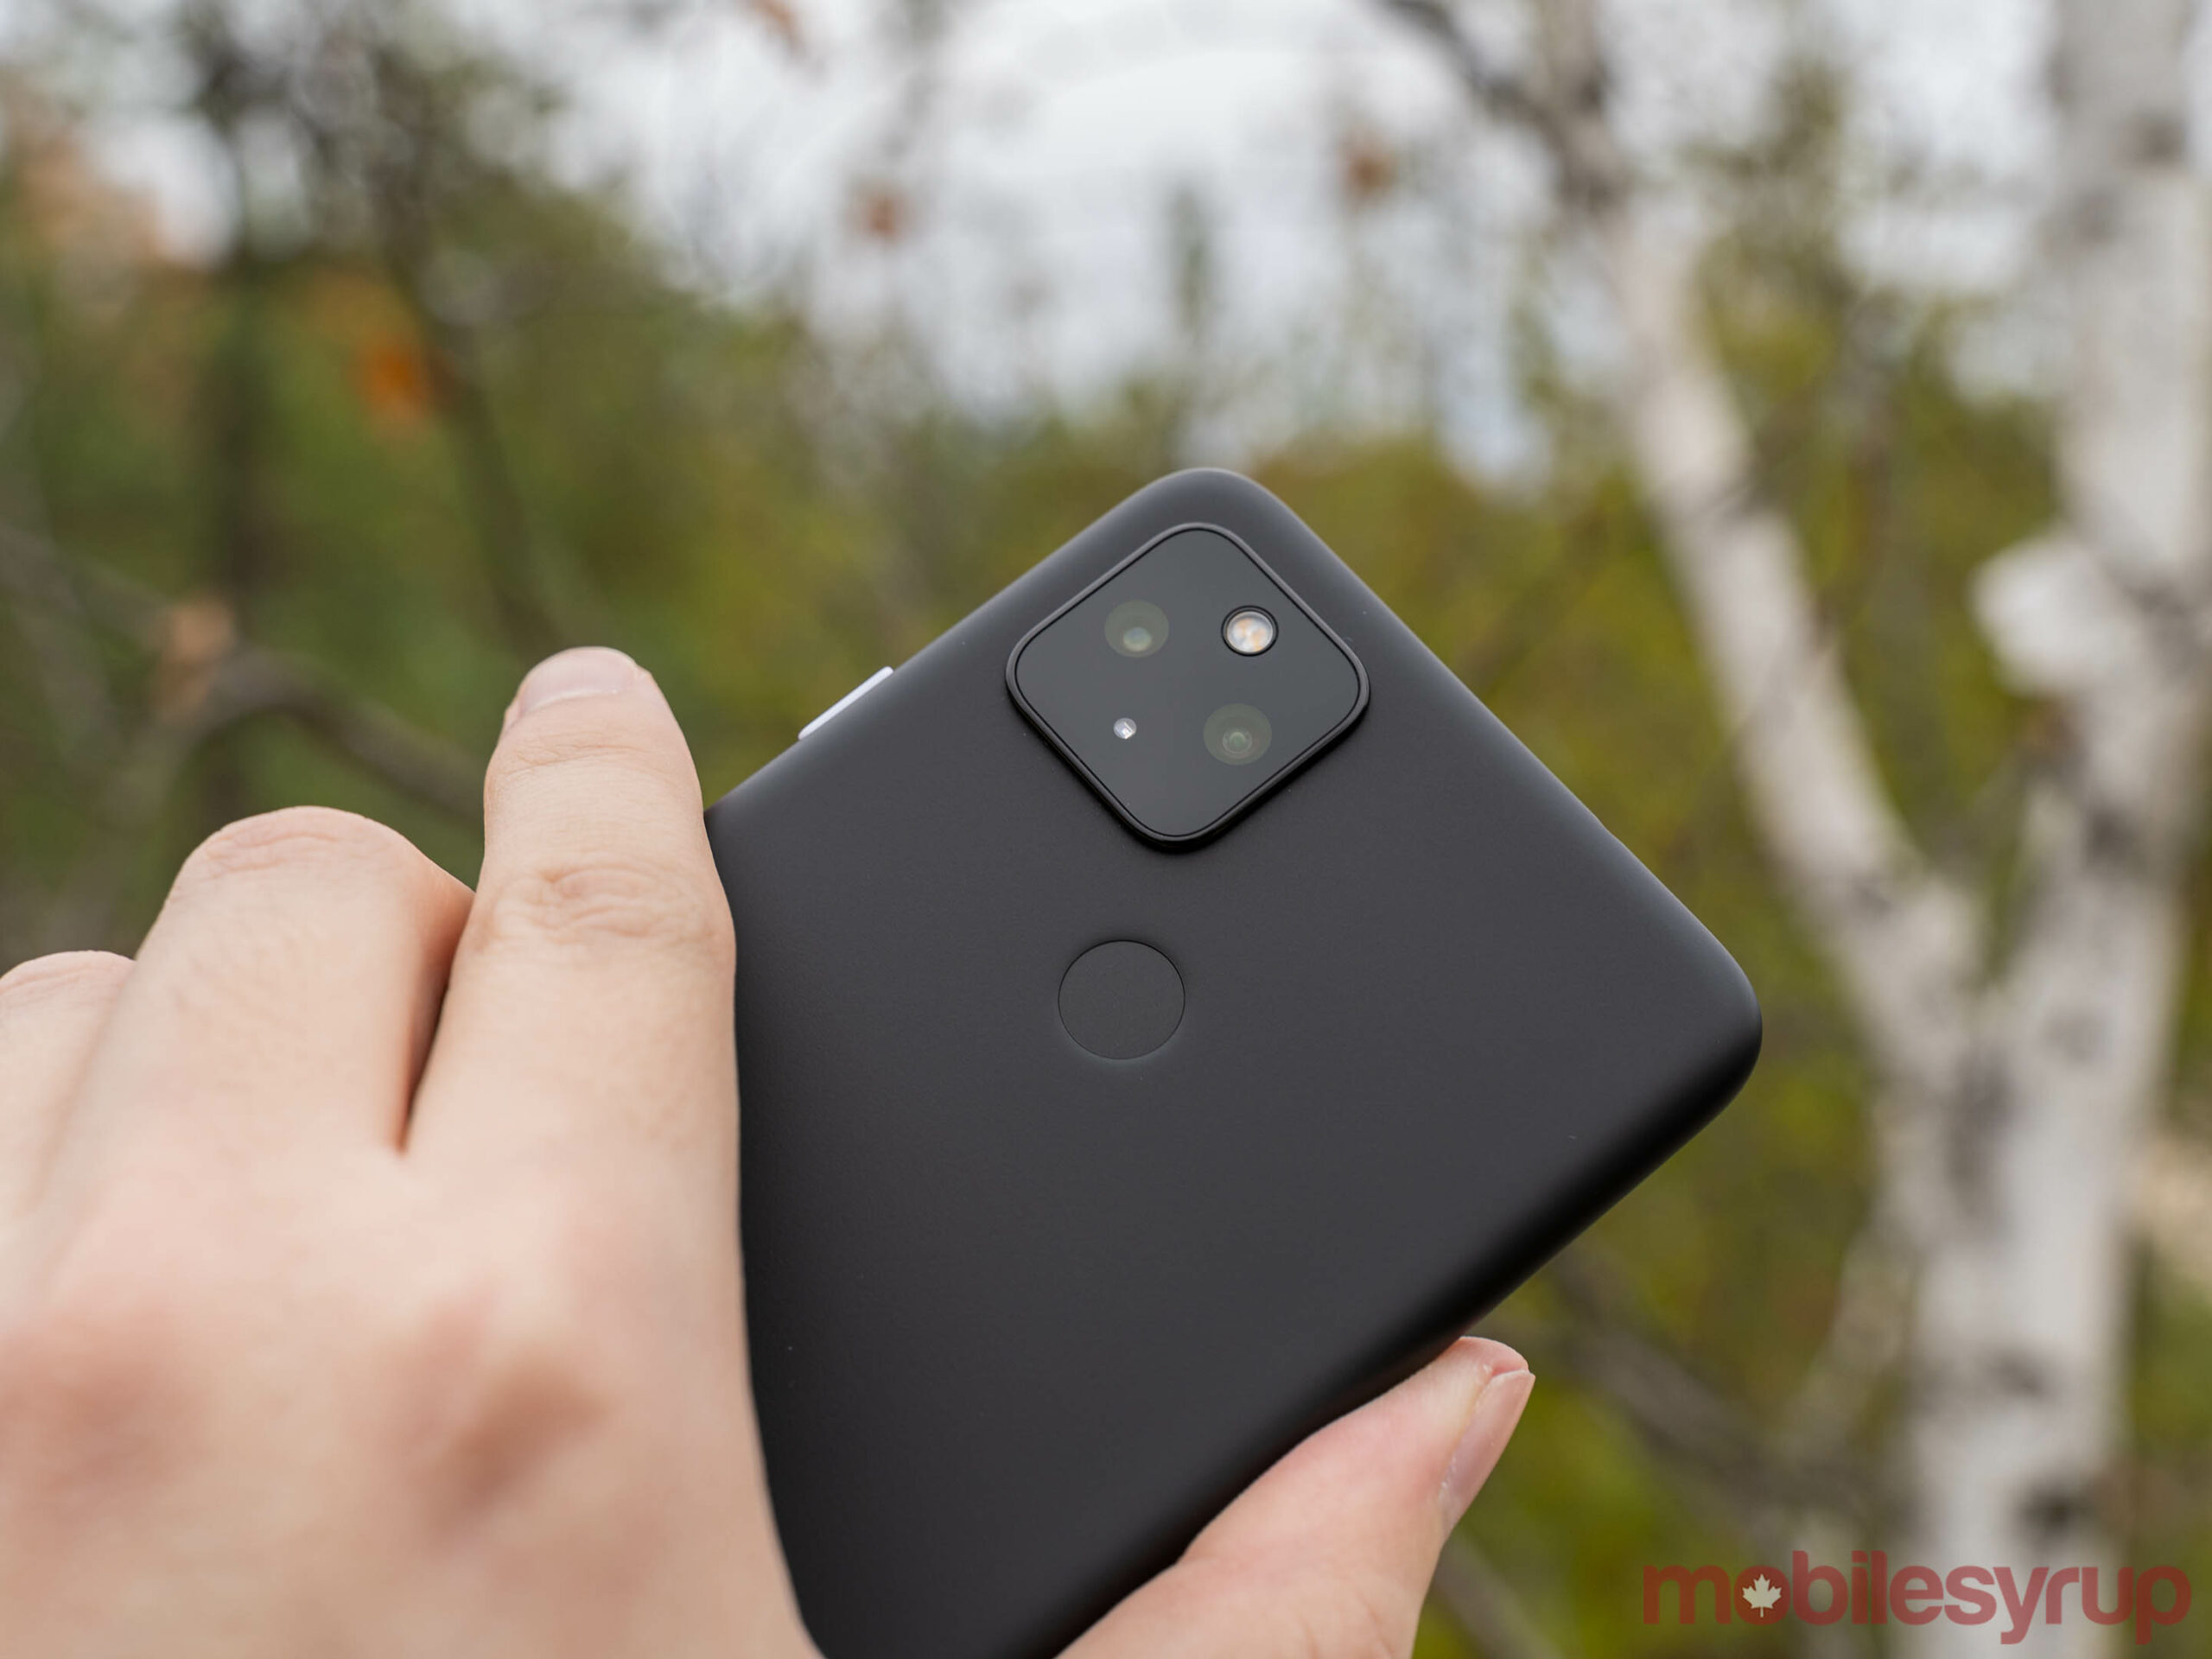 Pixel 4a 5G Review: Everything you need, nothing you don't